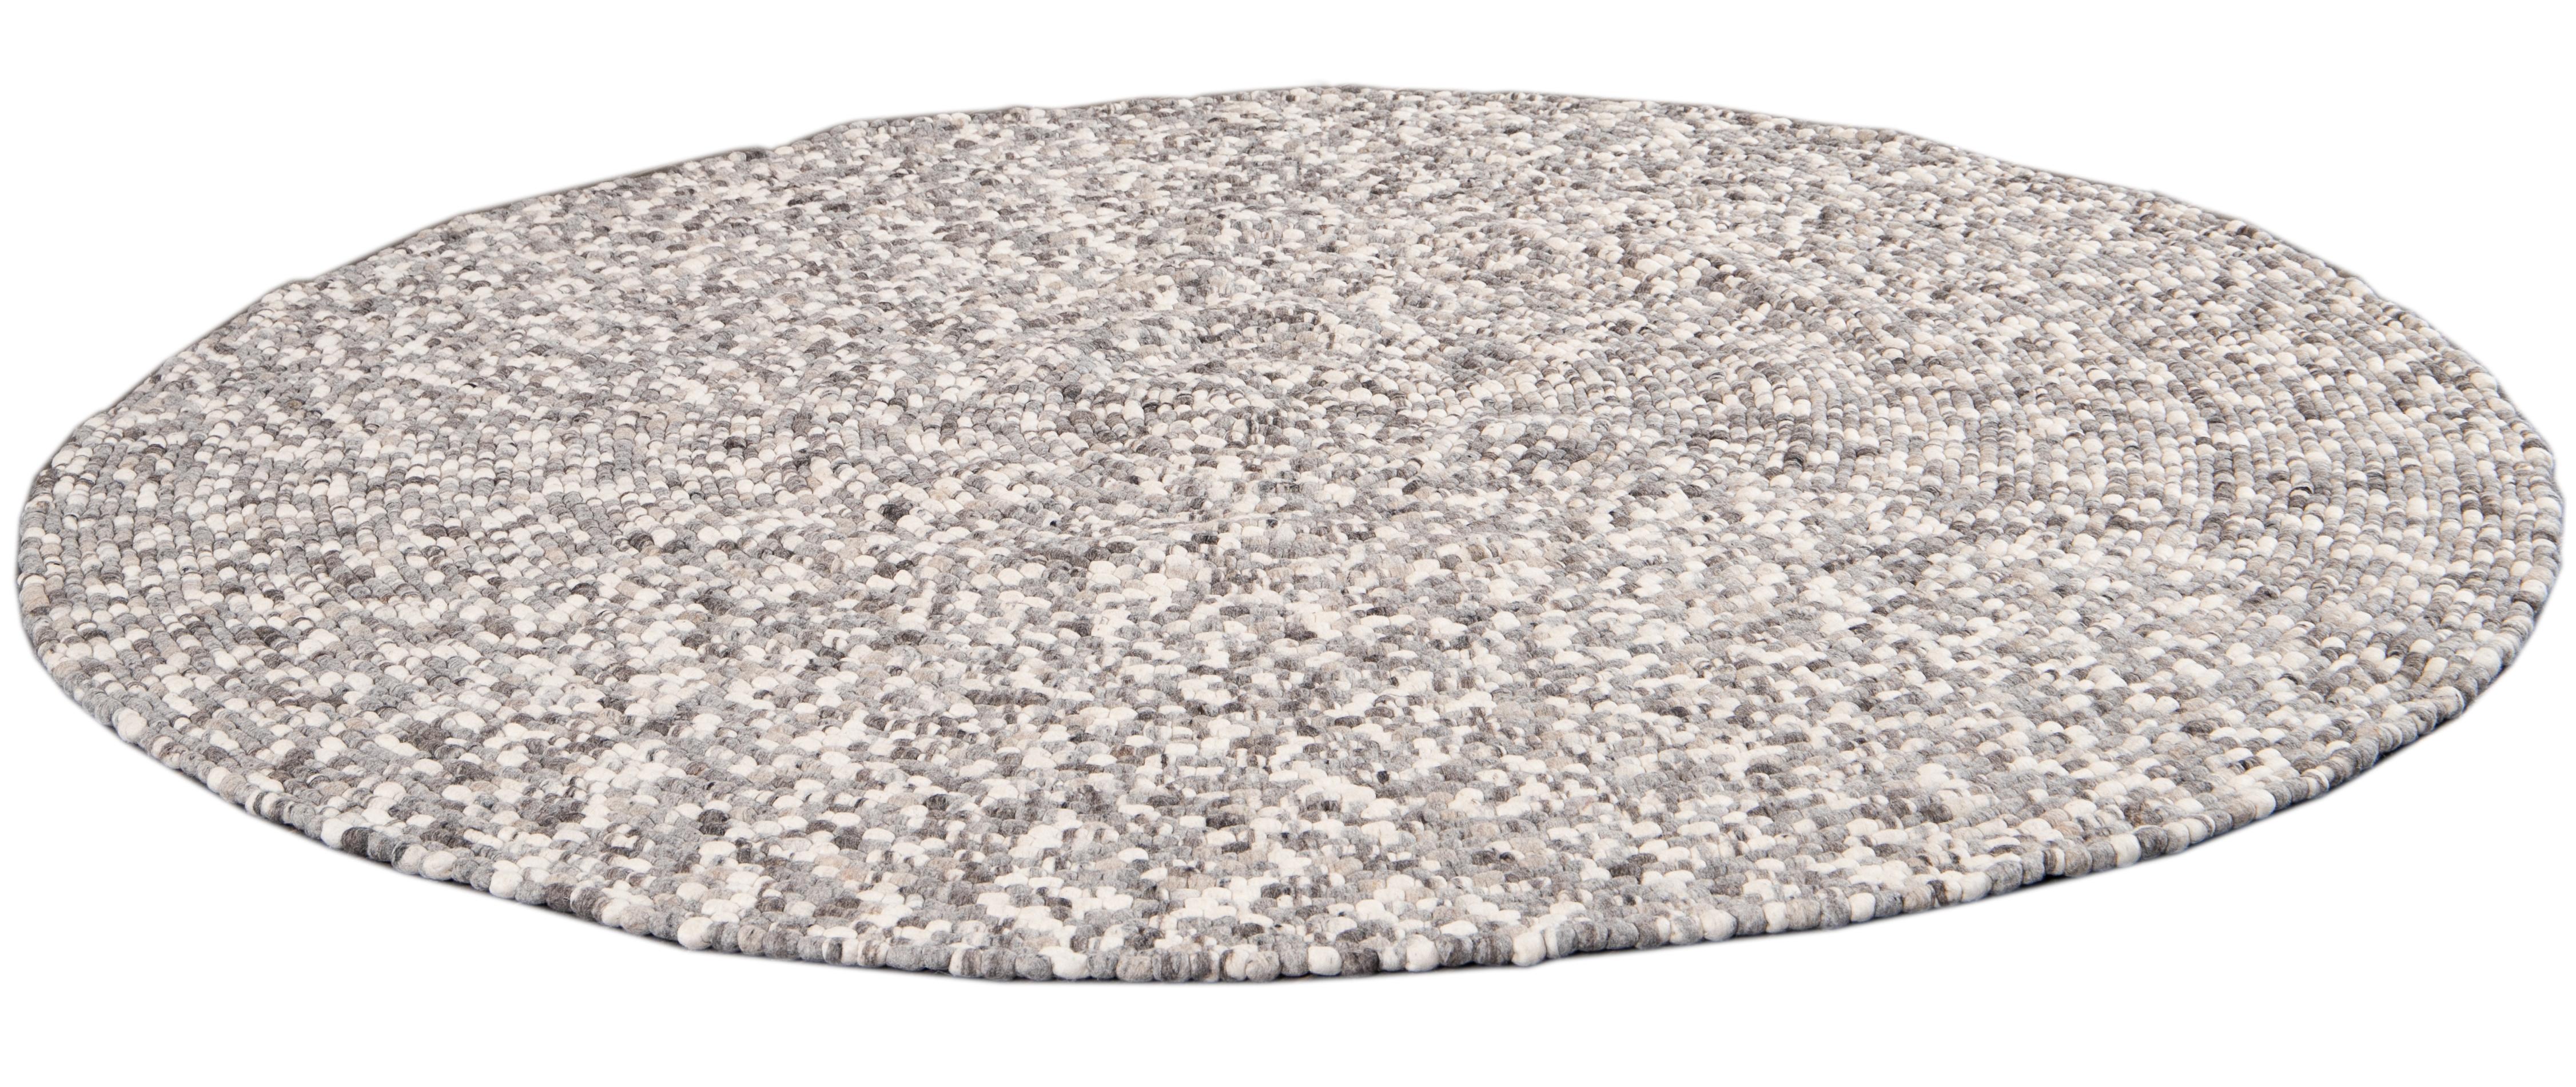 Beautiful contemporary Round Textured rug, hand knotted wool with an ivory field, tan and gray accents.

This rug measures 8' 0